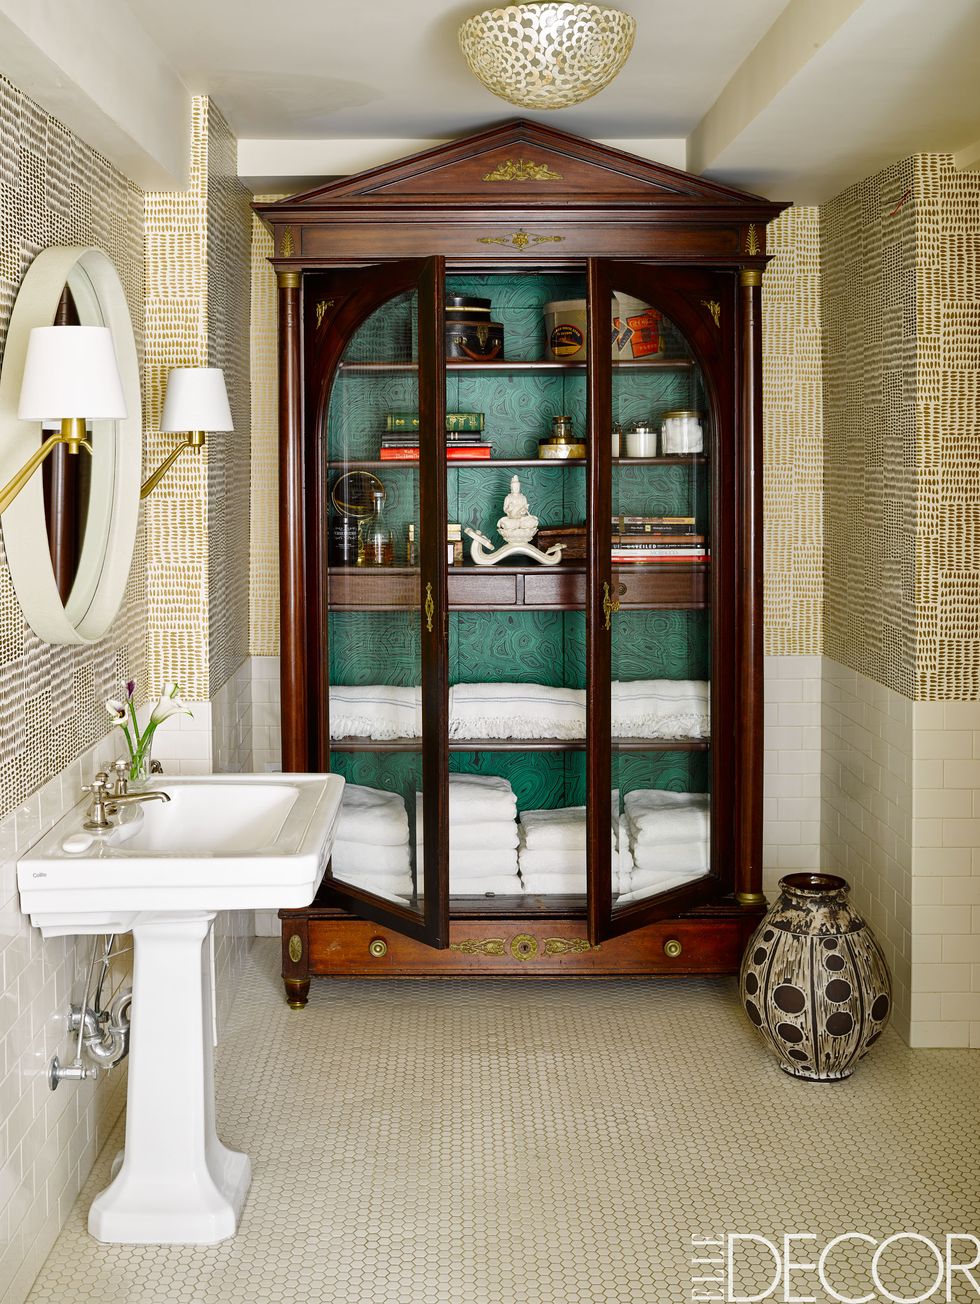 17 Bathroom Vanity Storage Ideas That Will Save Your Cabinets and